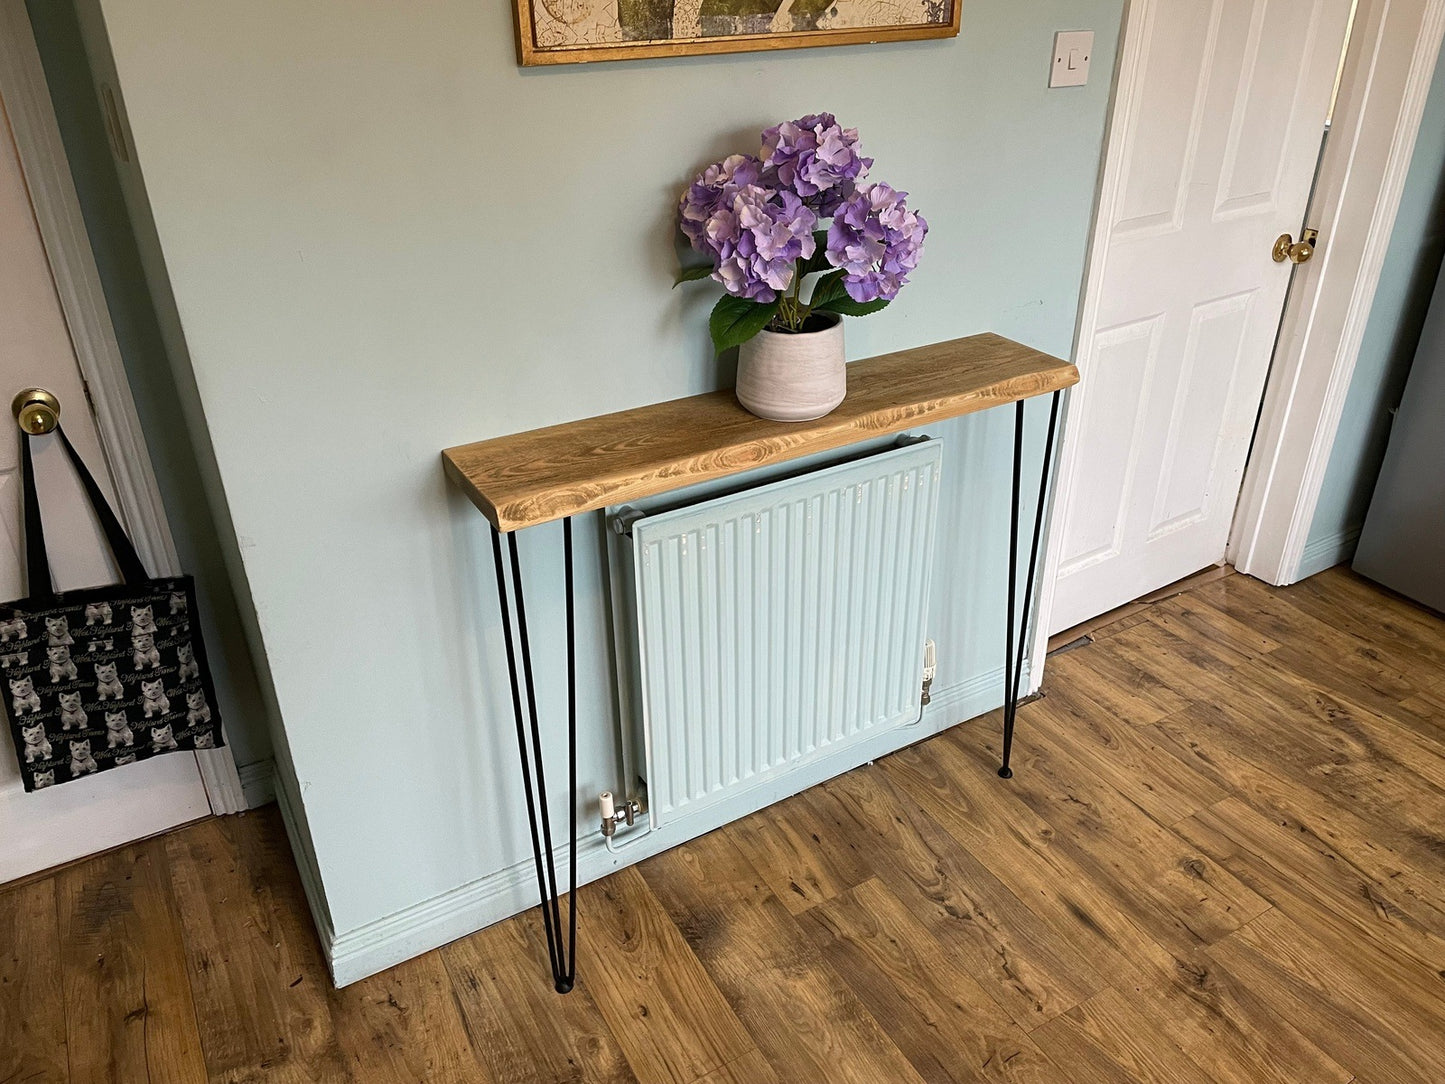 live edge Console Table with Hairpin Legs, radiator shelf, Wooden Rustic Hallway table, Radiator Shelf / Cover, Handmade Wooden Hall Table.